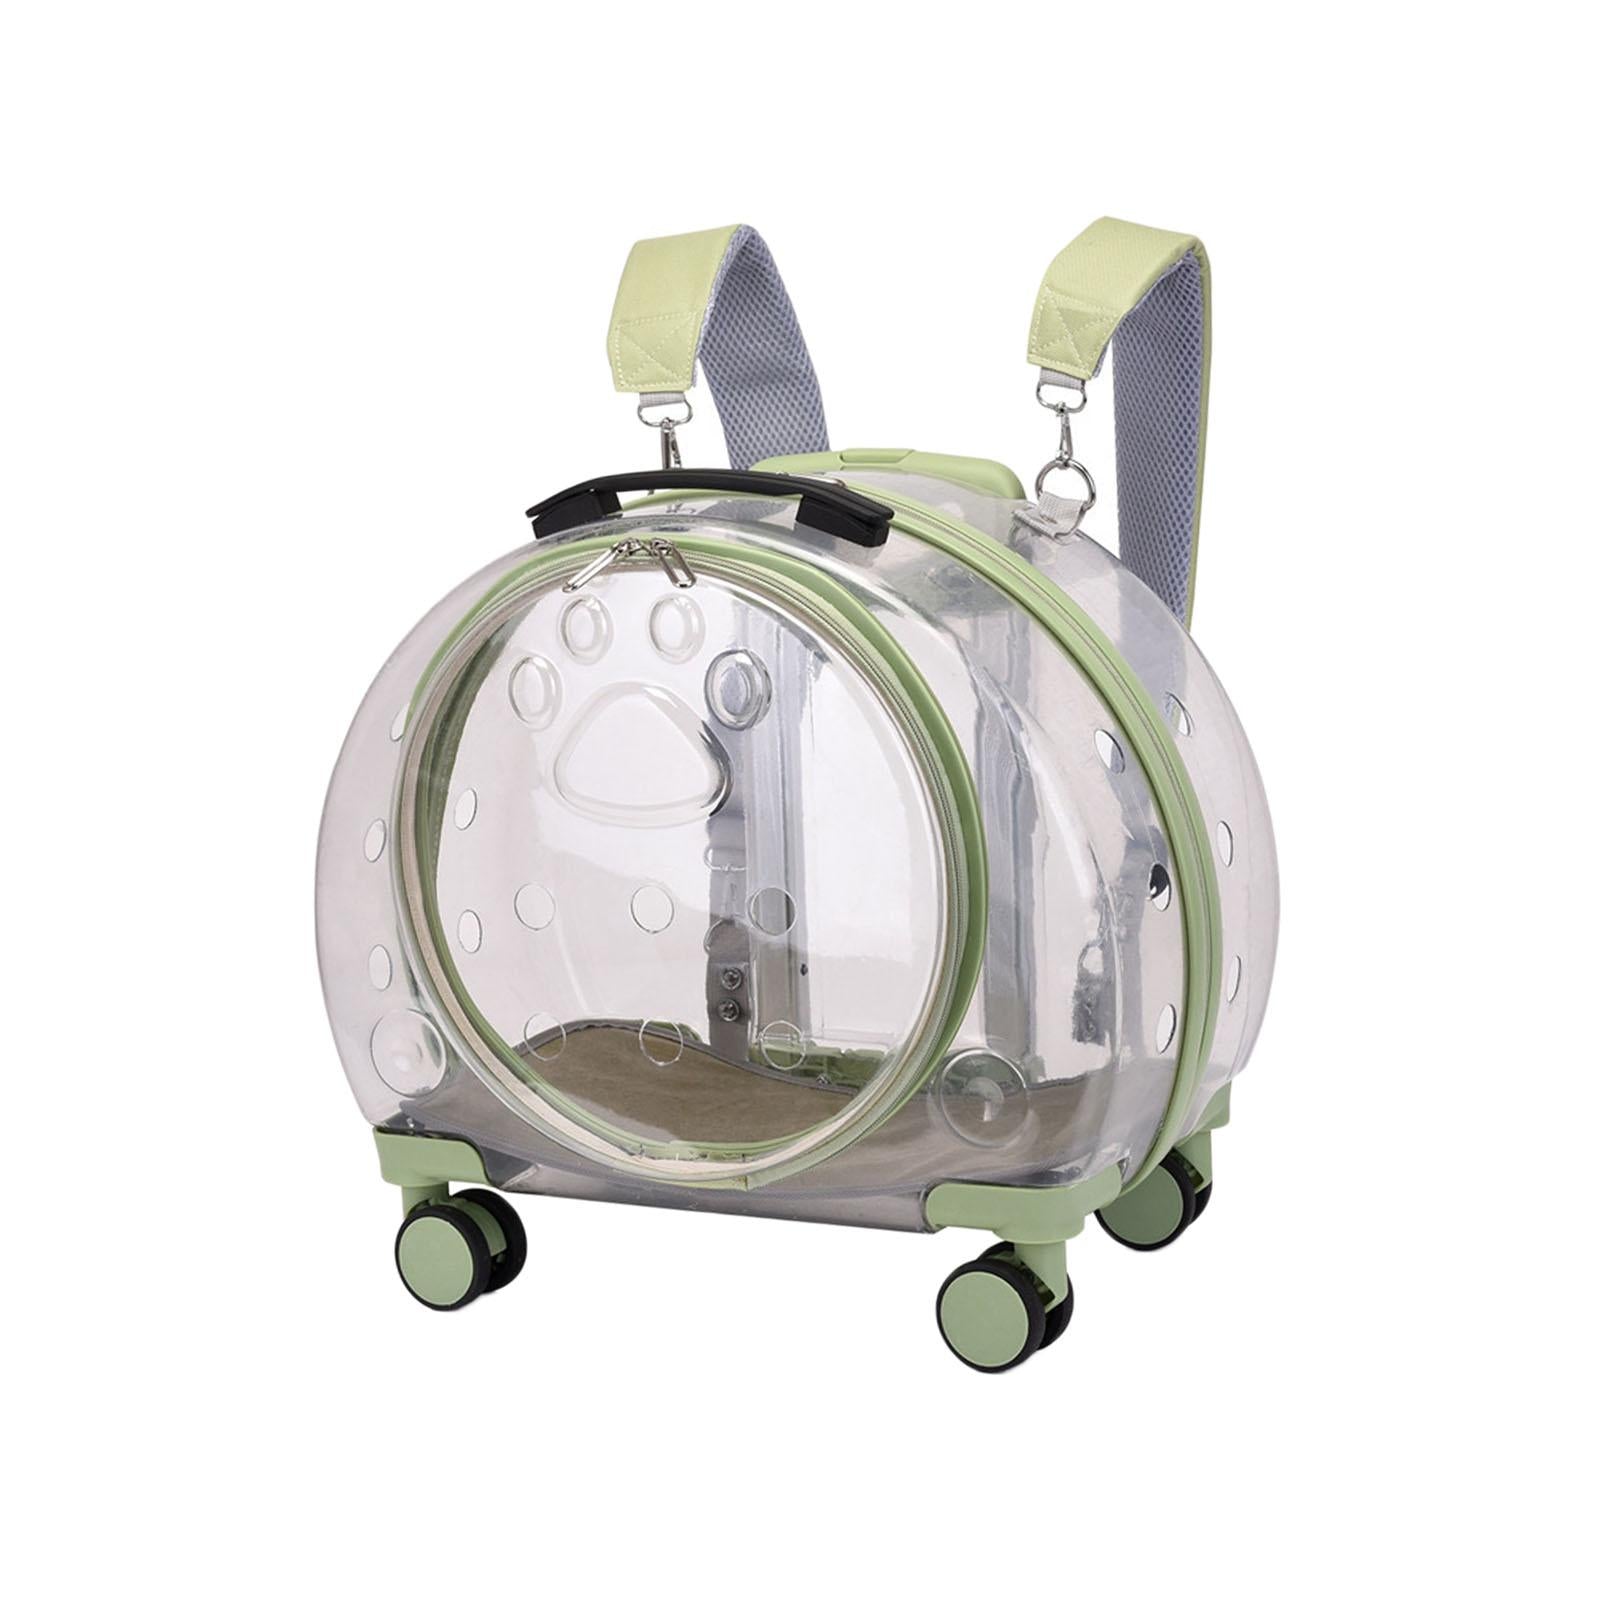 Kitten Bag, Backpack Telescopic Pull Rod Lightweight with Wheels Luggage Handbag Pet Trolley Case for Small Dogs Outgoing Cats Fishing Kitten Fully Clear and Green